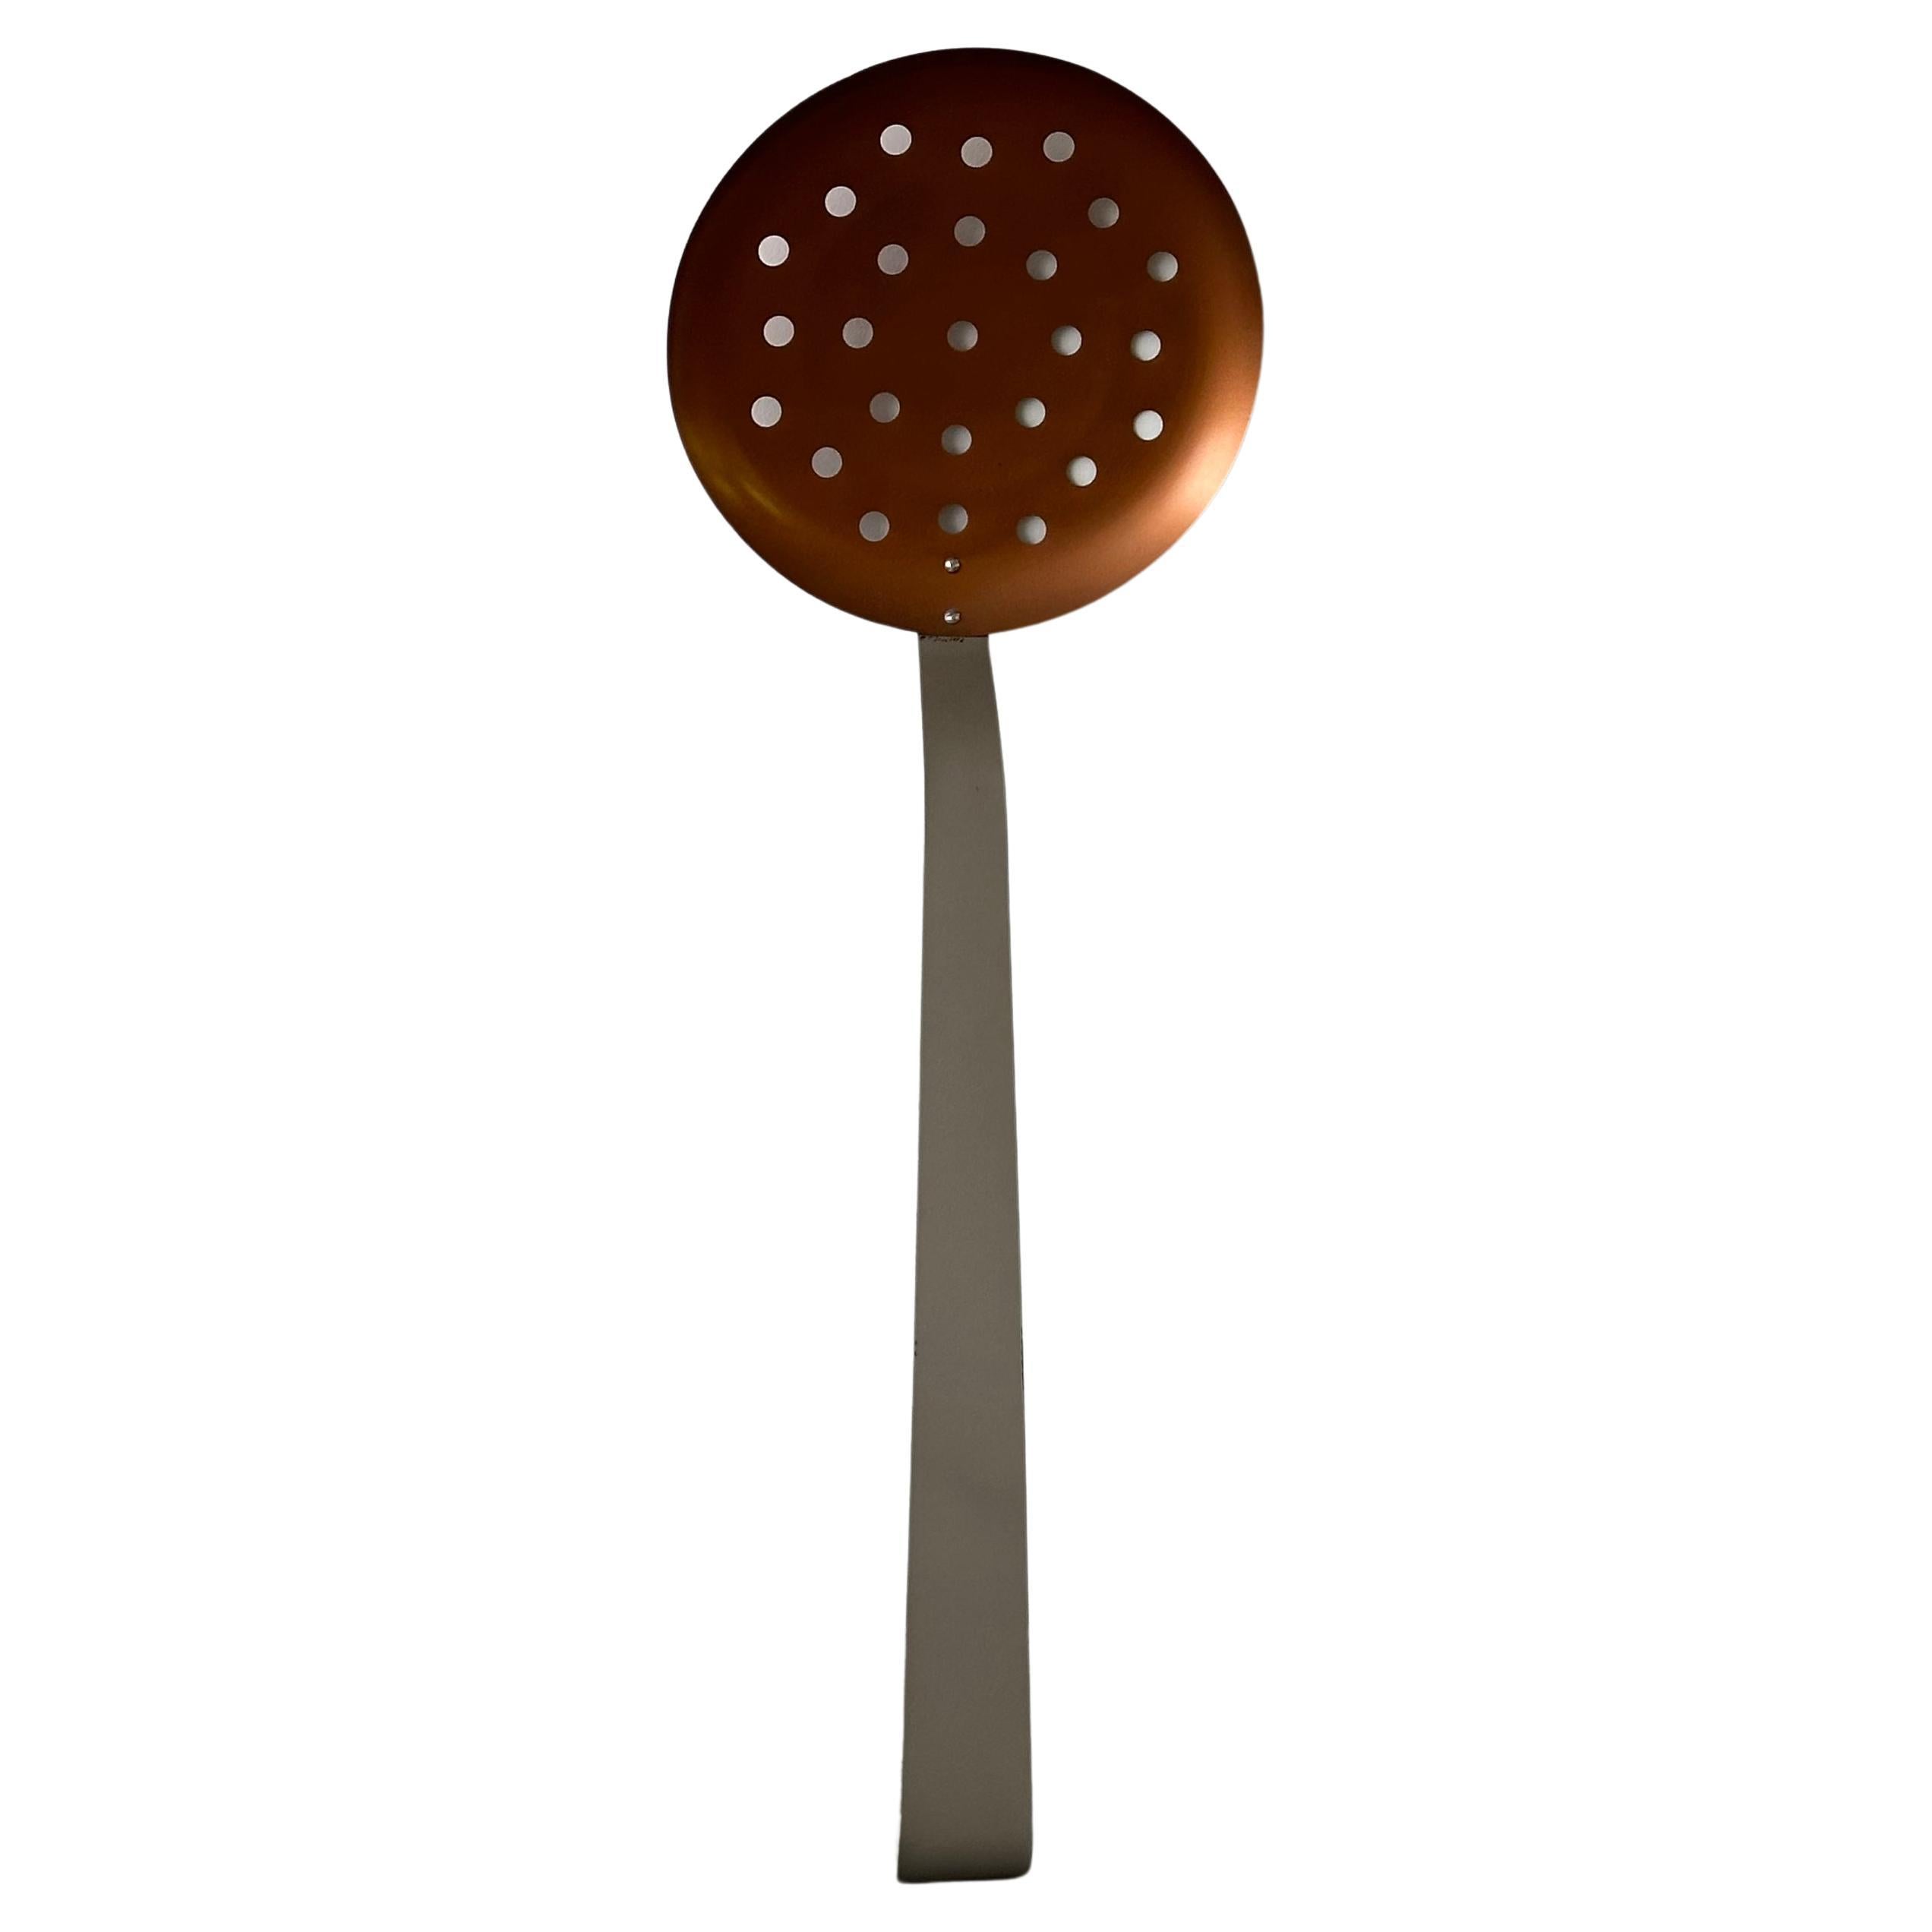 Curtis Jere Pop Art Slotted Spoon For Sale